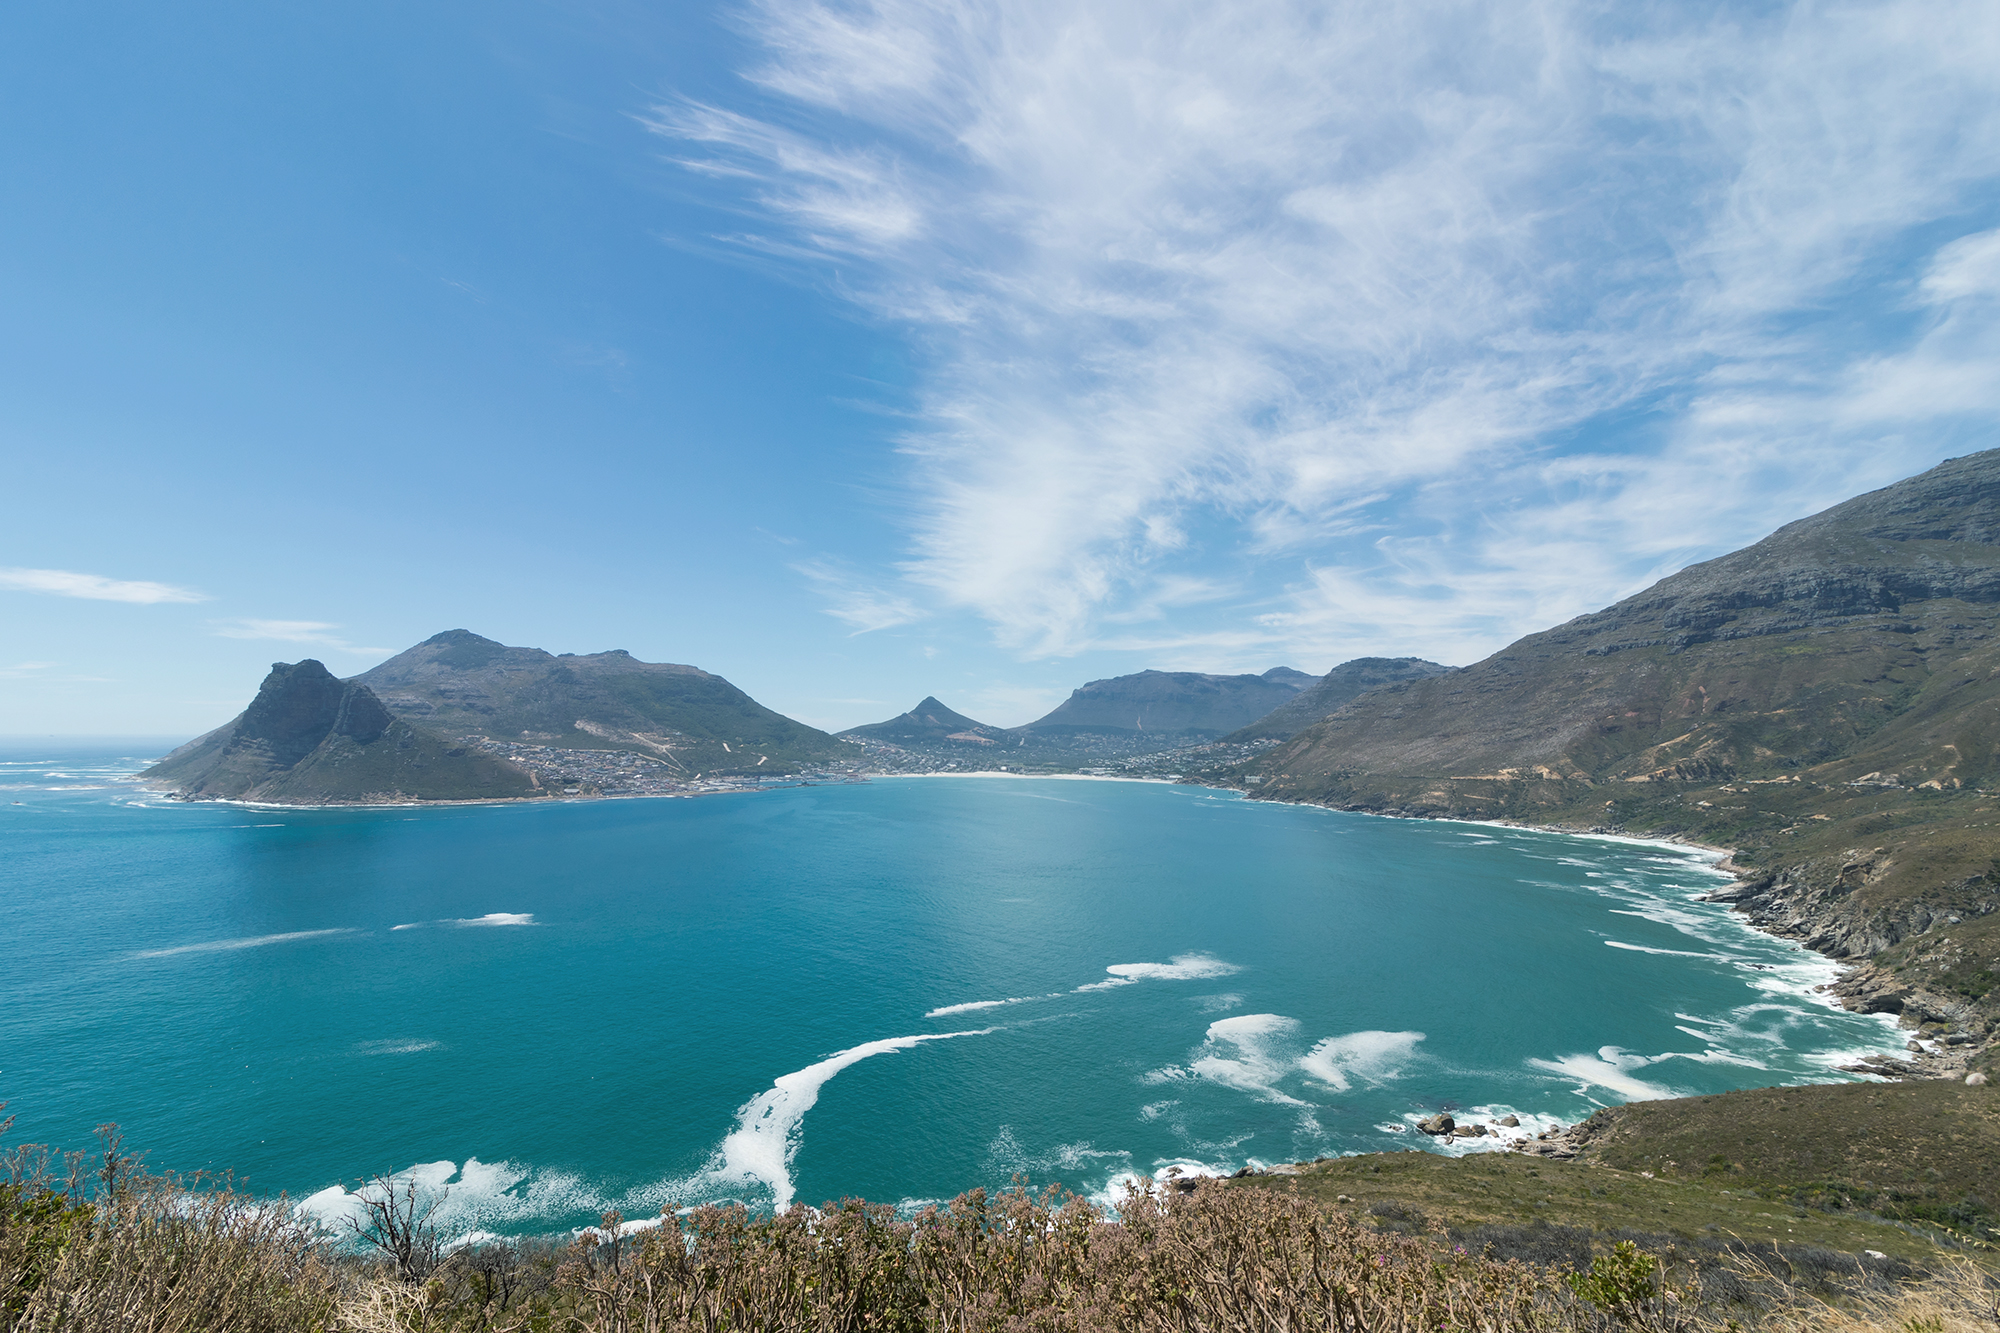 A breathtaking view of the Chapman's Peak by the ocean captured in South Africa